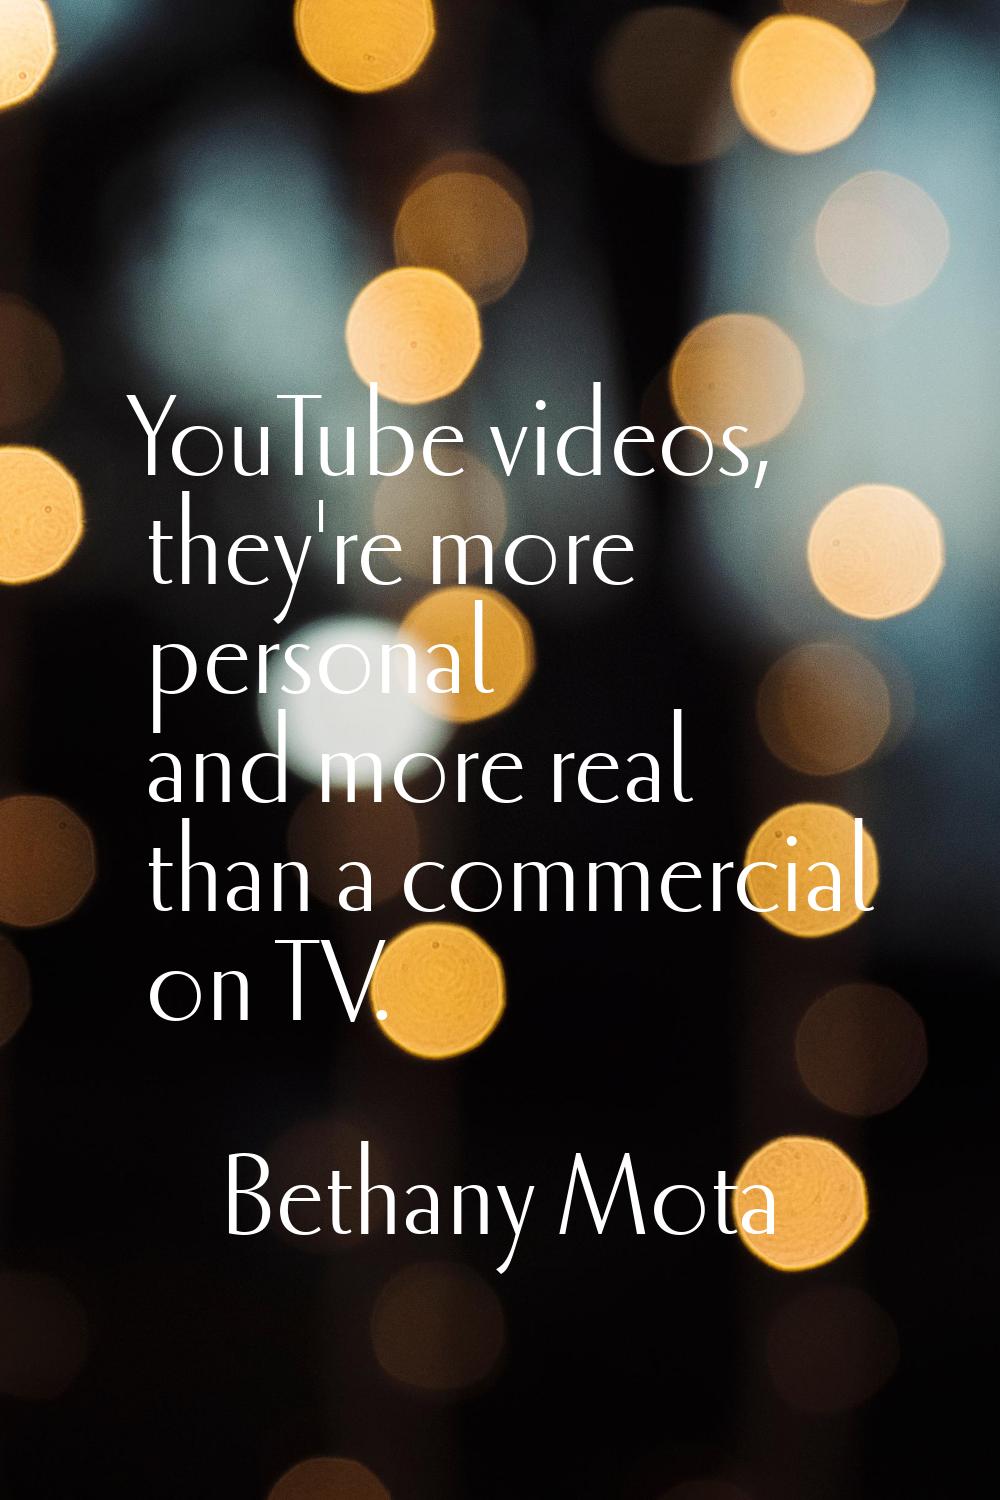 YouTube videos, they're more personal and more real than a commercial on TV.